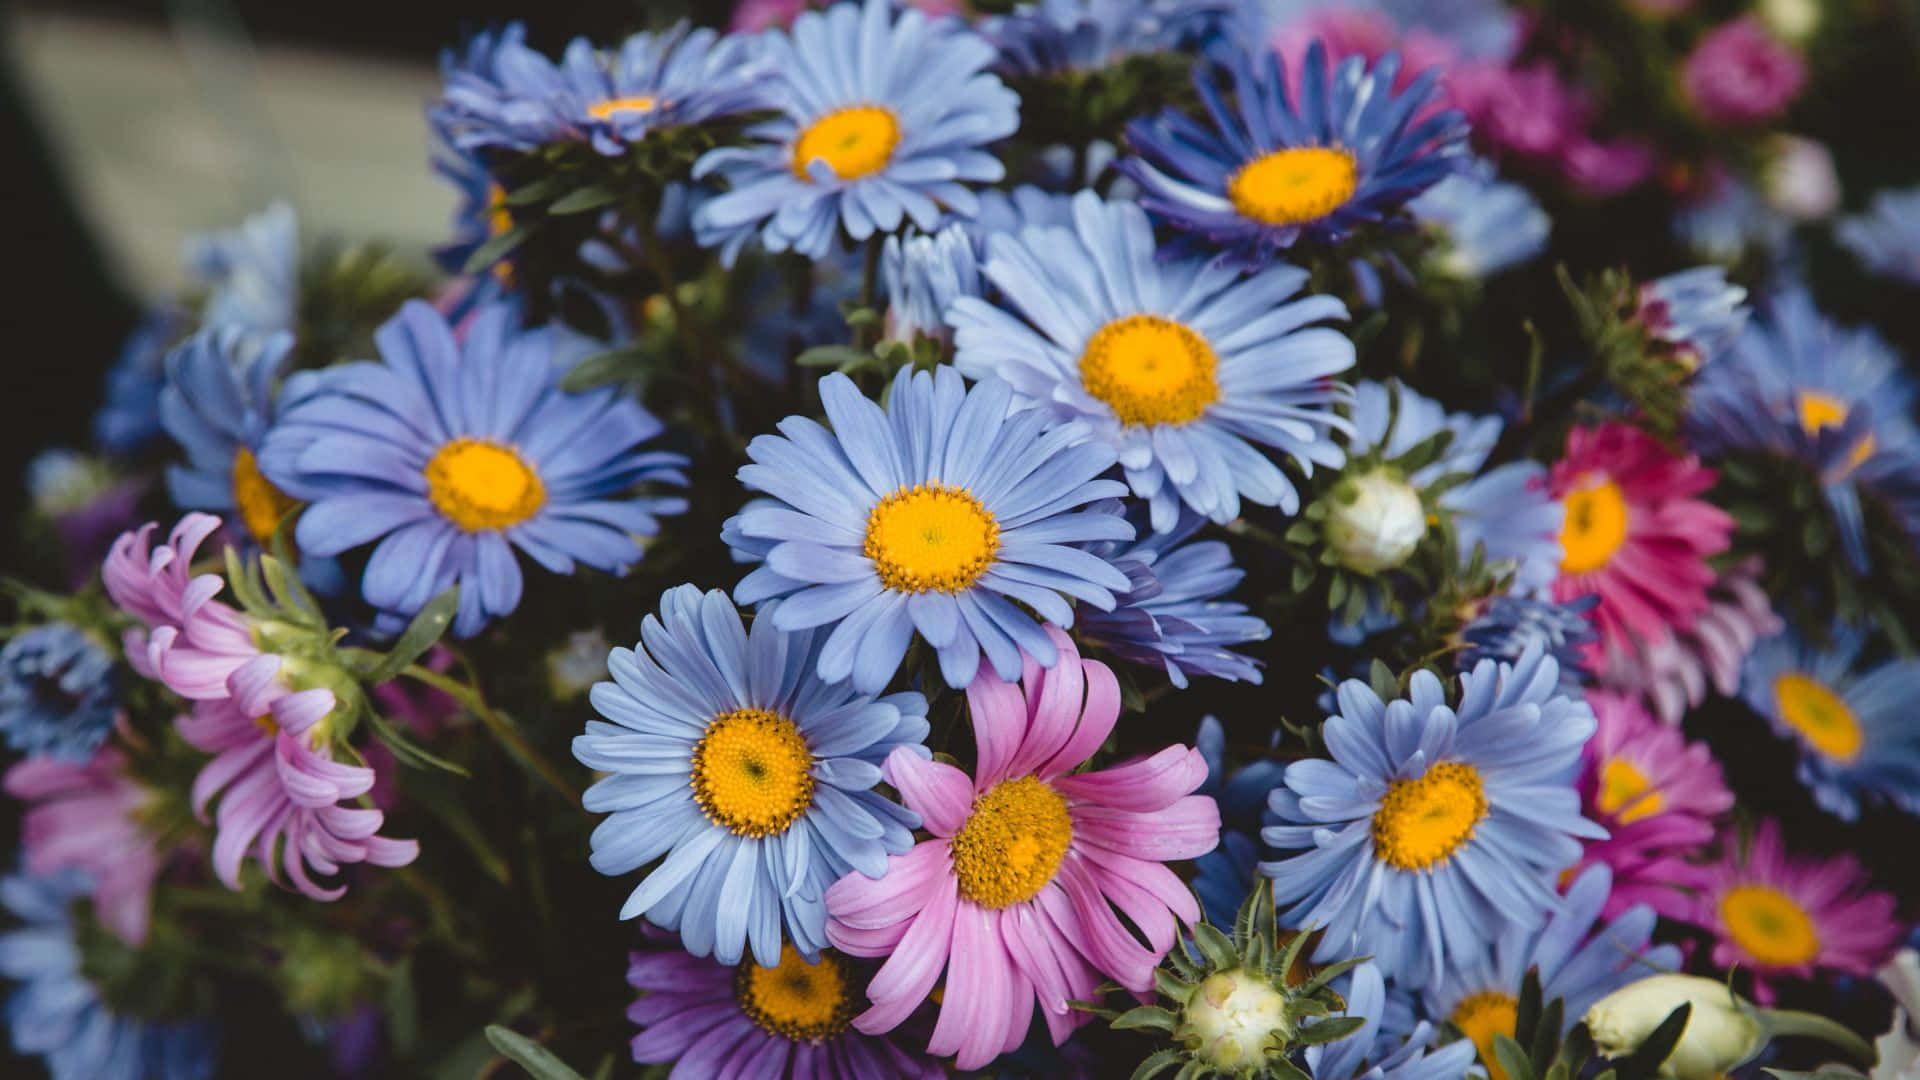 Colorful Daisies Induce Joy and Encouragement Wallpaper